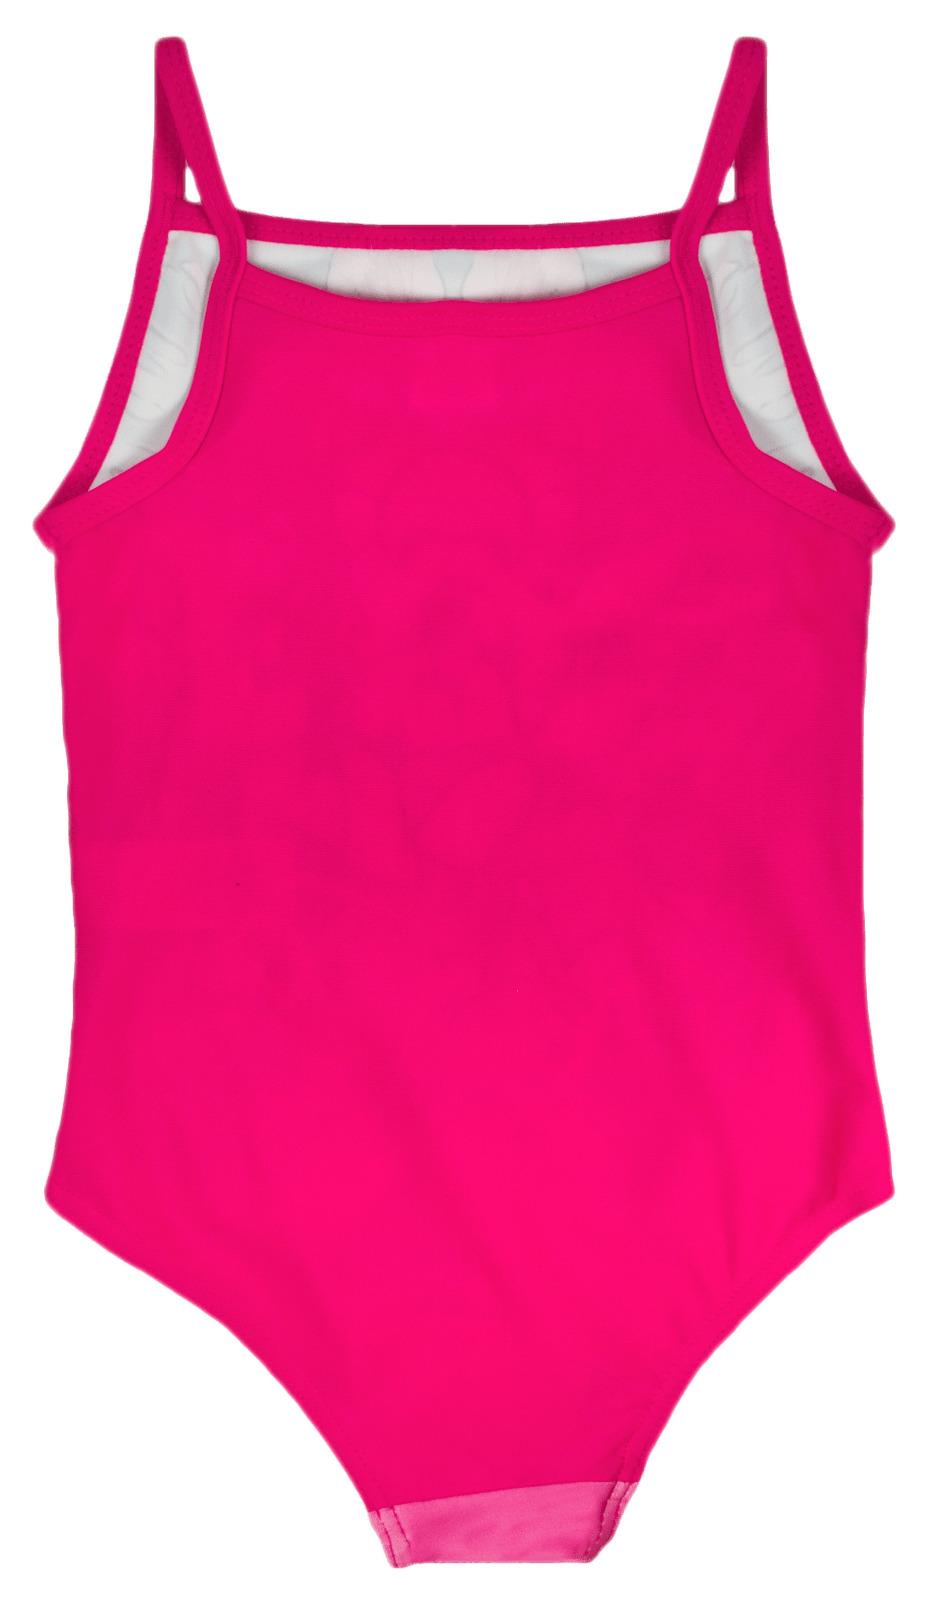 Pink Swimming Suit png transparent